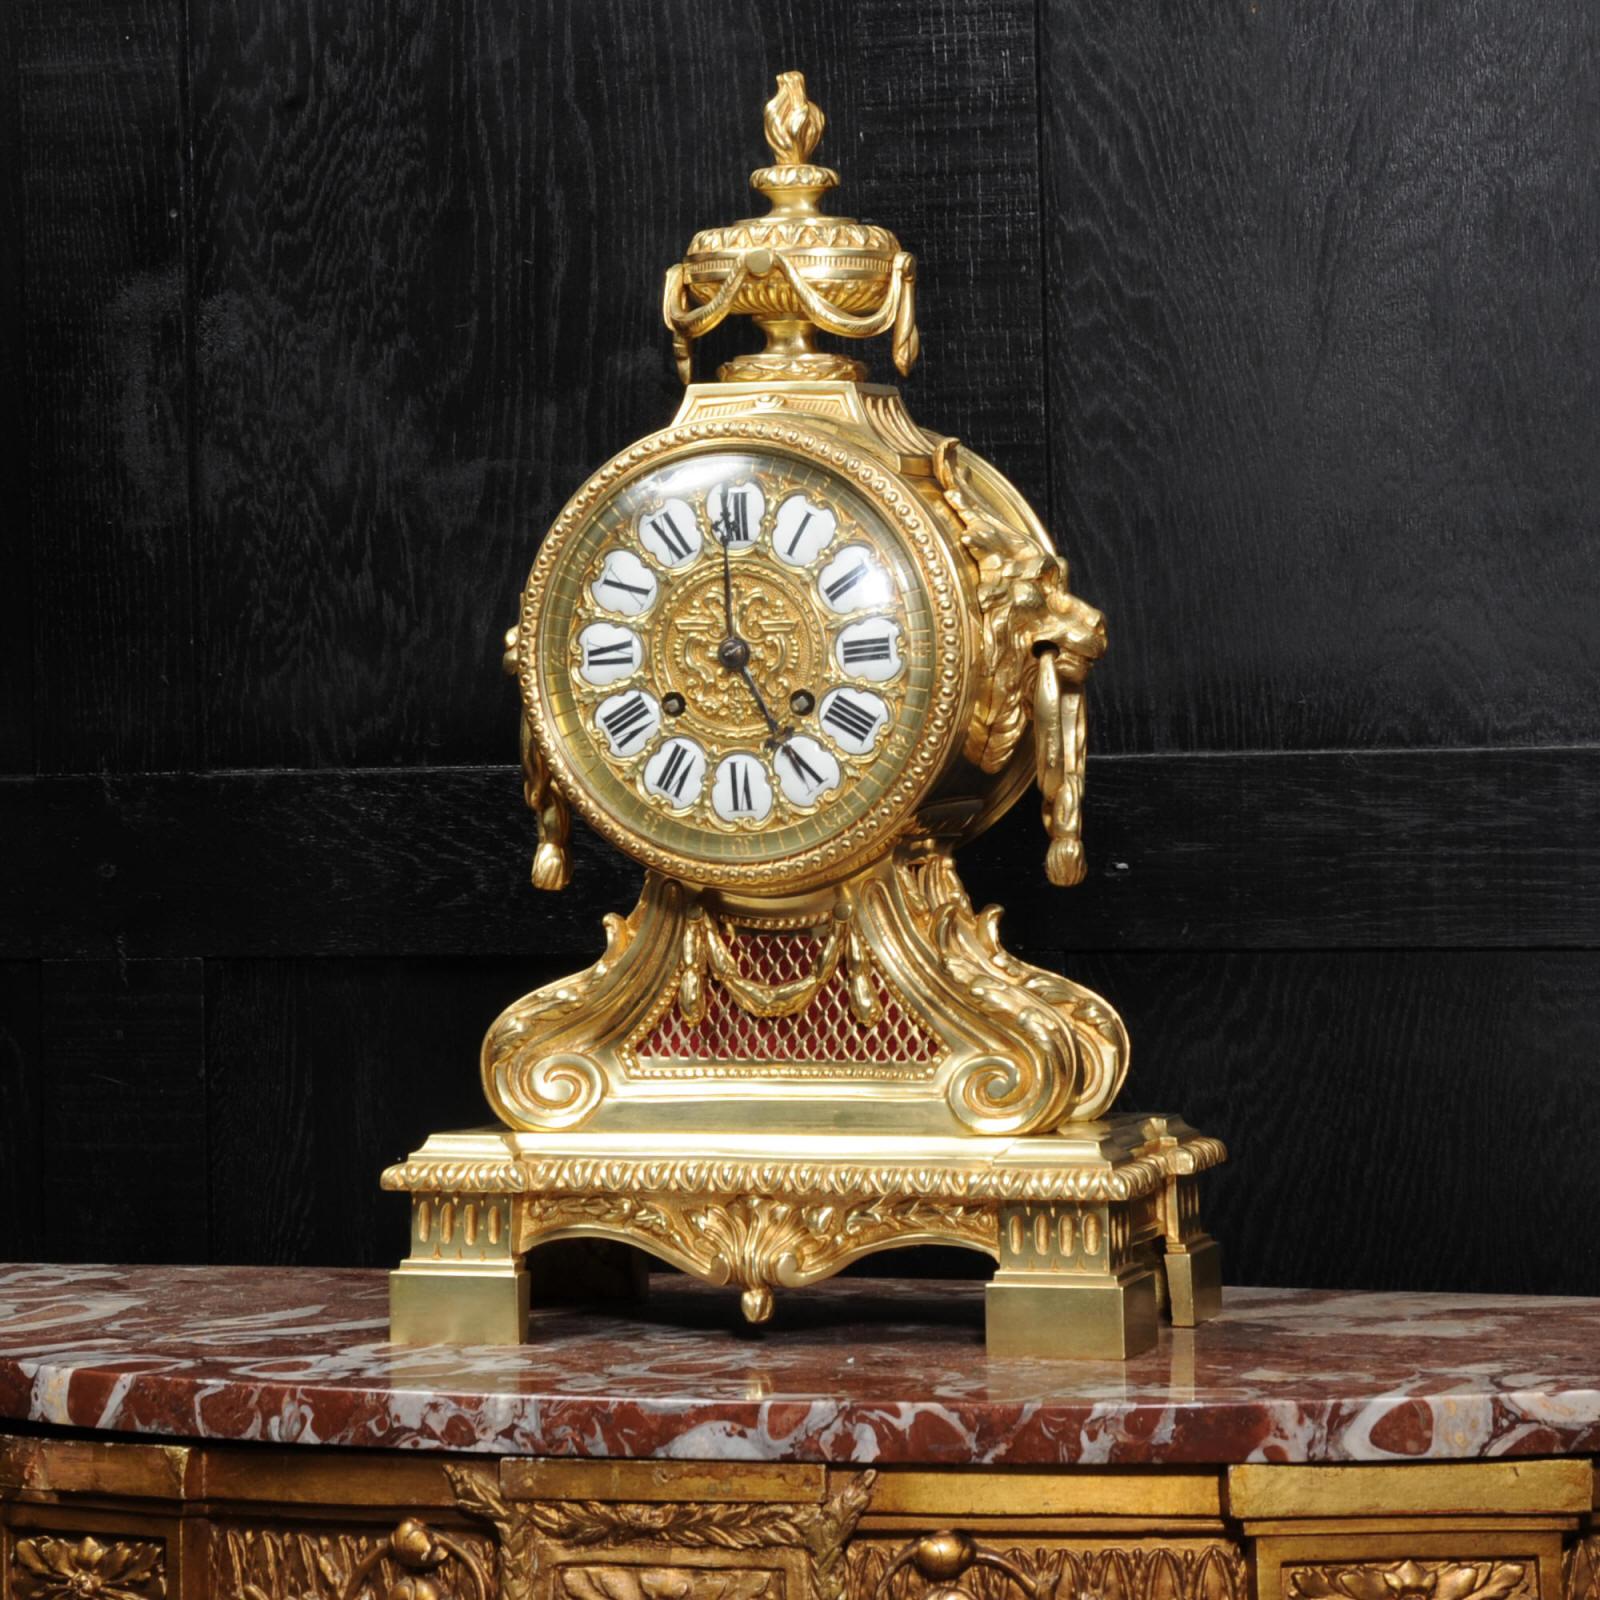 A large, imposing and heavy original antique French gilt bronze clock. It is a beautifully made drum head clock in the classical style of Louis XVI and retailed by G. Philippe, of the prestigious Gallery Montpensier of the Palais Royal. The movement